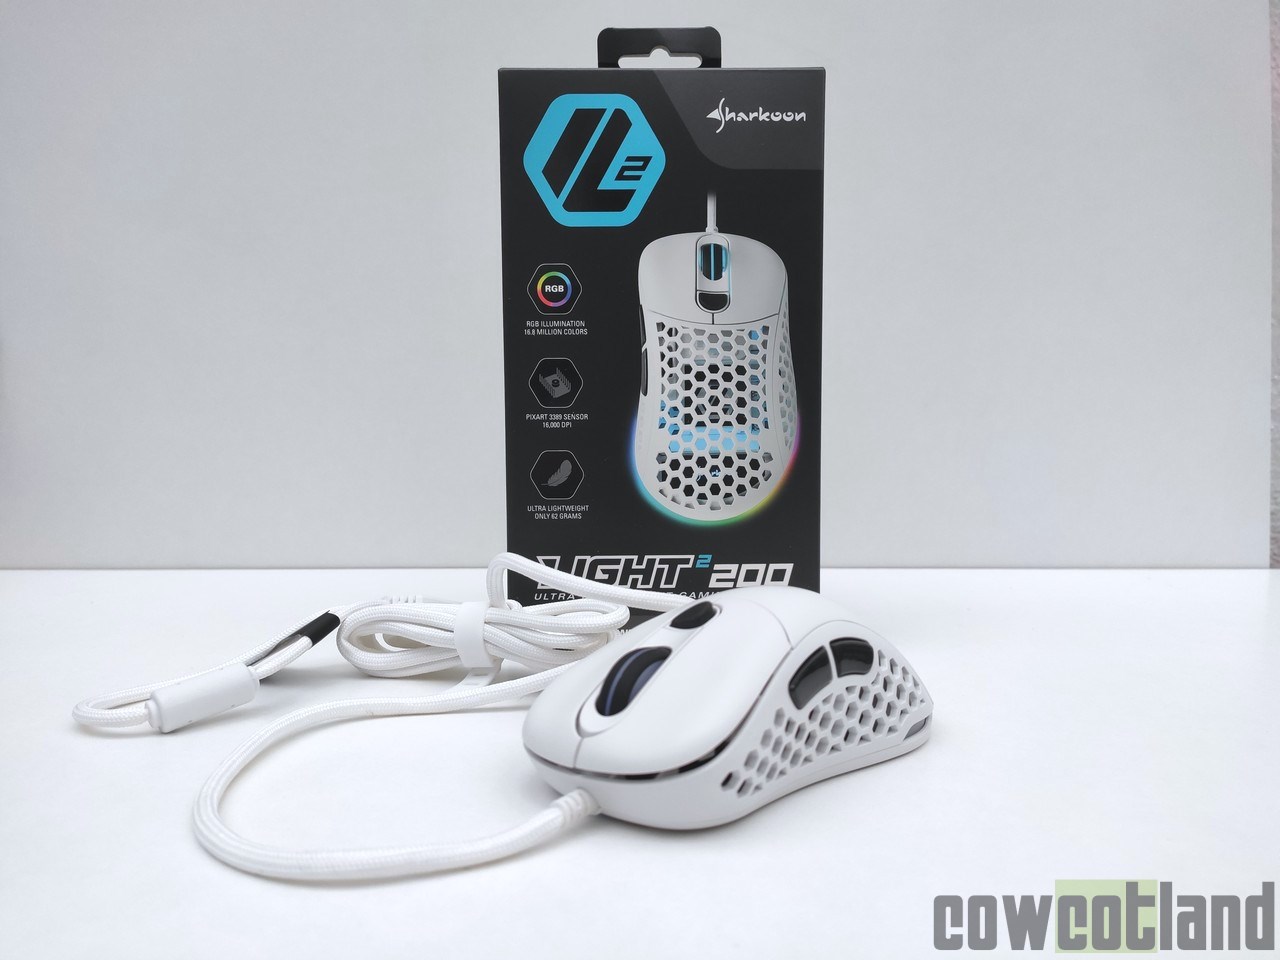 Image 43520, galerie Test souris Gaming Sharkoon Light 200 : Zowie-Killer ?